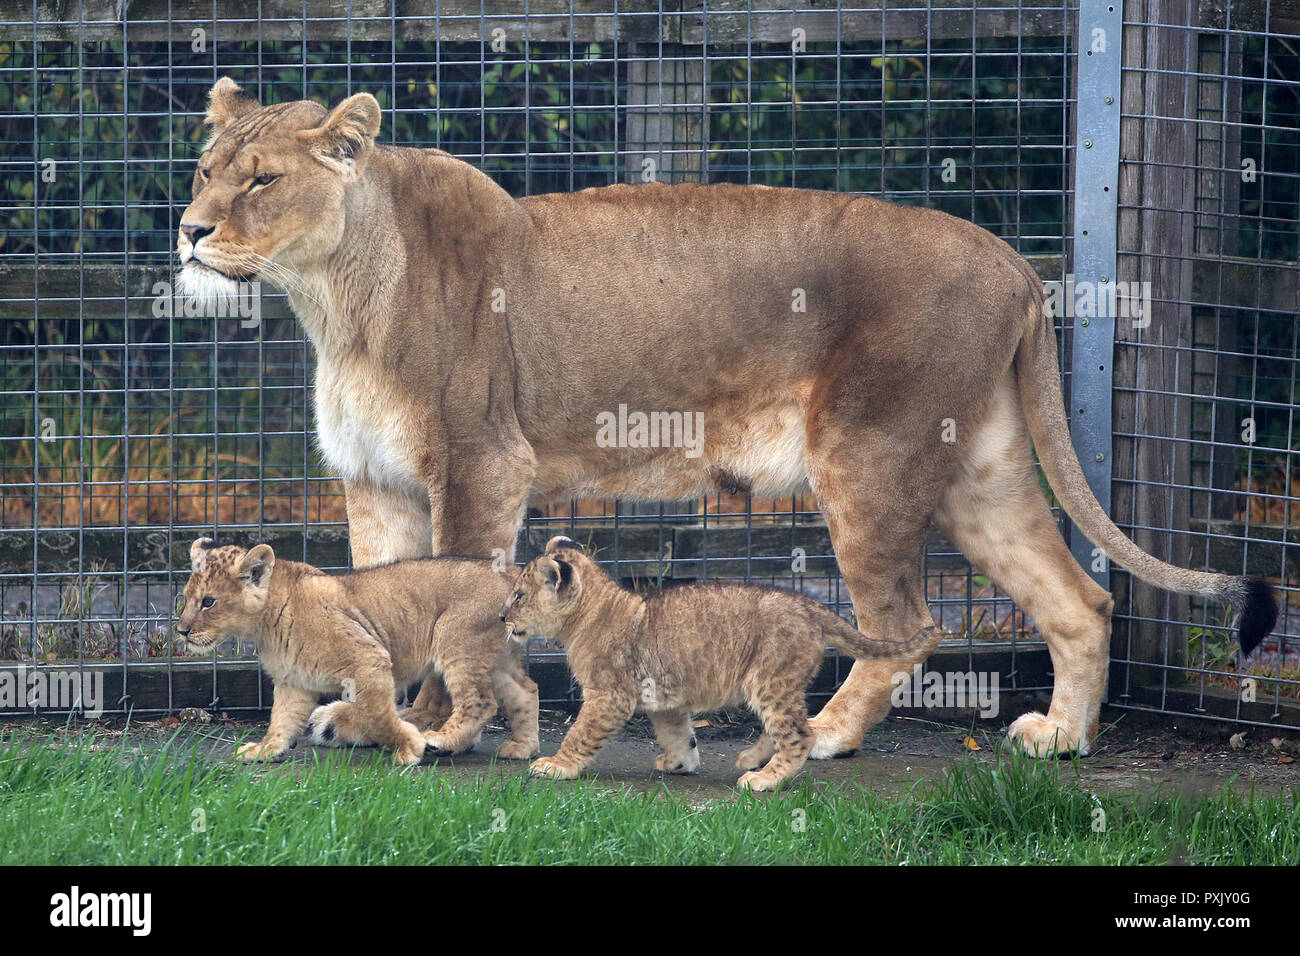 The first African lion cubs born in the UK since 2015 have taken a bow. The adorable new cubs which are yet to be named were born at Noah's Ark Zoo Farm on the outskirts of Bristol on August 20. Their mother lioness Arusha has never successfully reared a litter of cubs until now and the keepers are giving her space to raise the cubs without intervention allowing the precious 'mother and cub bonds' to develop. With African lions given a 'vulnerable' status by the International Union for Conservation of Nature the zoo is celebrating these precious arrivals. Stock Photo